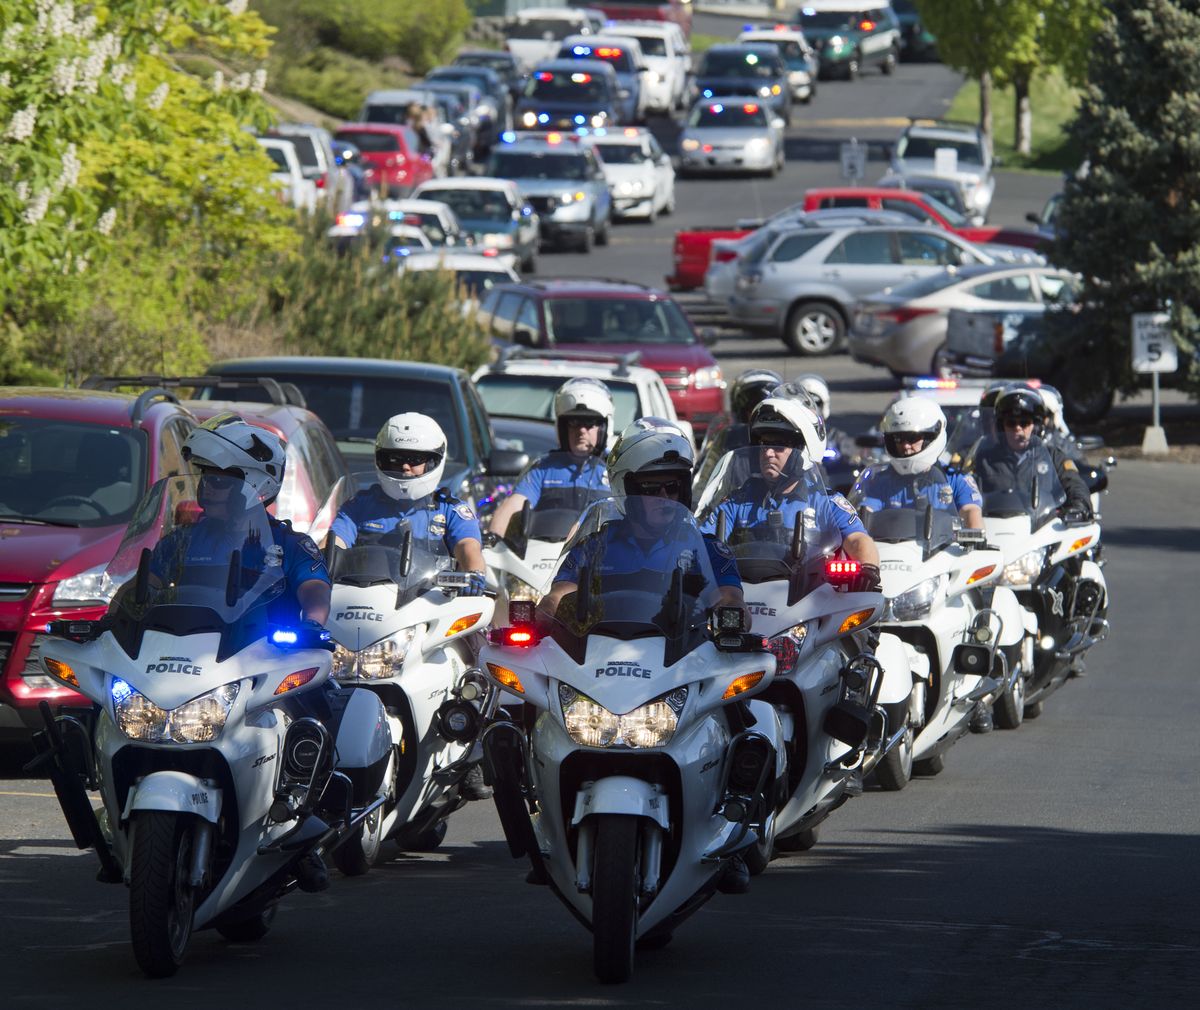 Spokane police officers take the lead in a procession of law enforcement vehicles leaving Holy Family Hospital Thursday morning to escort the body of slain Coeur d’Alene police Sgt. Greg Moore back to Idaho. Services are Saturday. (Dan Pelle)